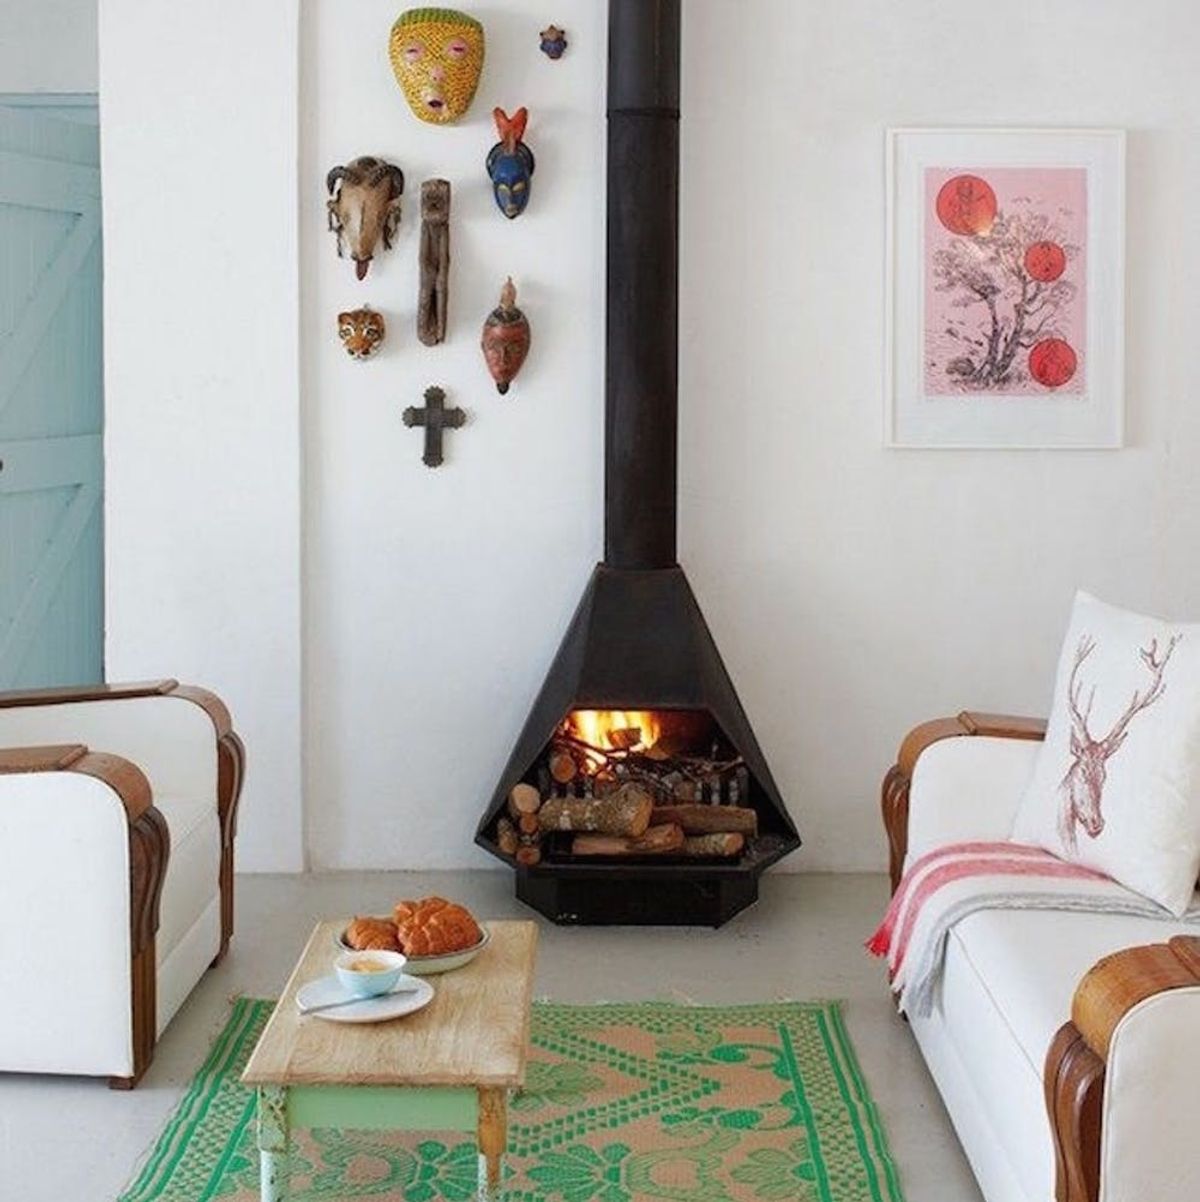 13 Wood Stove Decor Ideas for Your Home